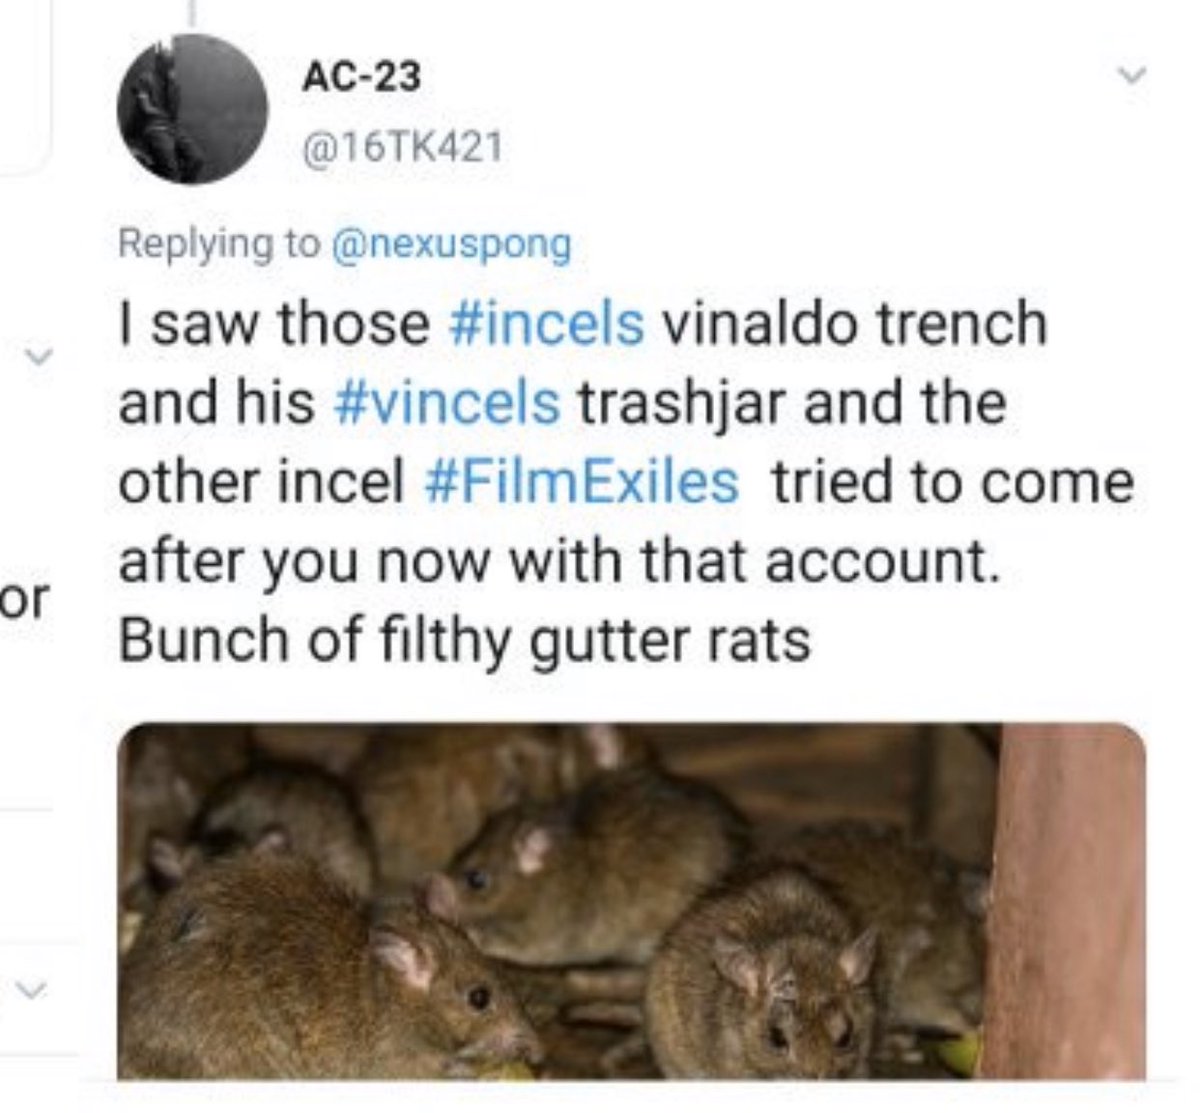 “Cockroaches hiding in the gutter” is rather specific language, along with the unique obsession with “ball washing” (perhaps it’s an irregular occurrence for him? IDK) and these burners with the same following/follower crowd quickly begins to paint a rather ugly picture of Abdul